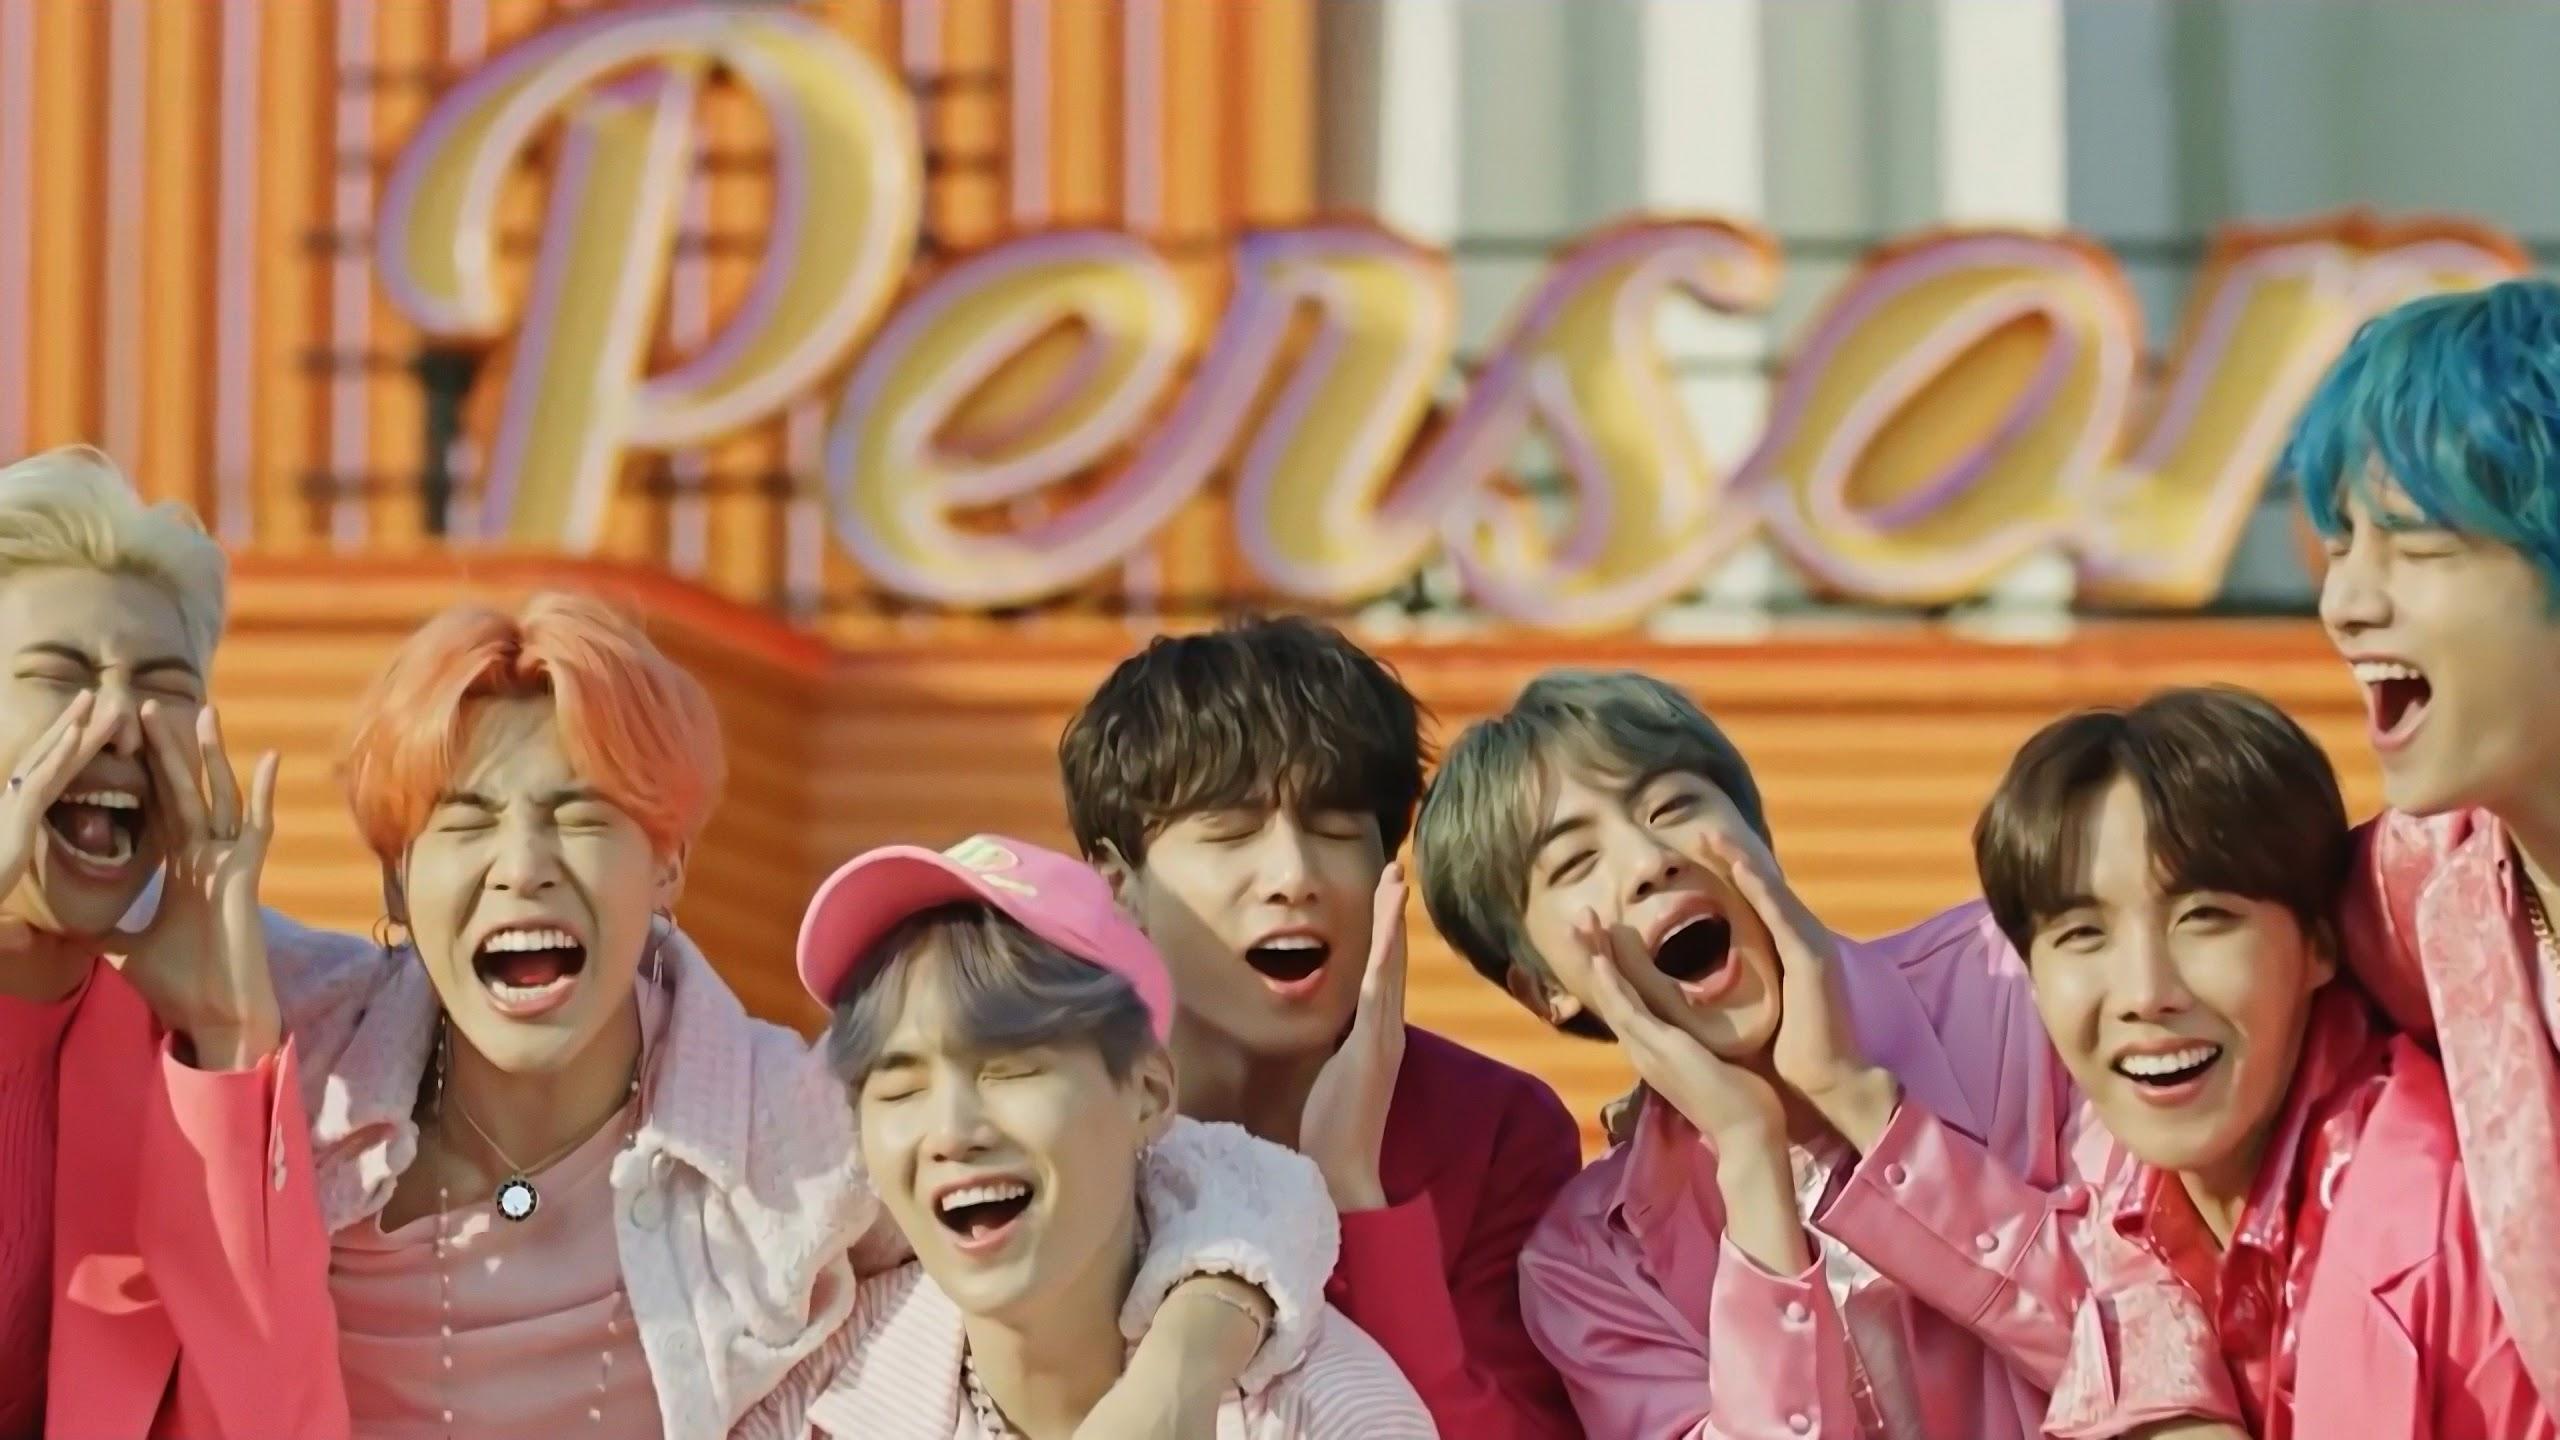 Bts, Boy With Luv, All Members, 4k, Wallpaper Boy With Luv